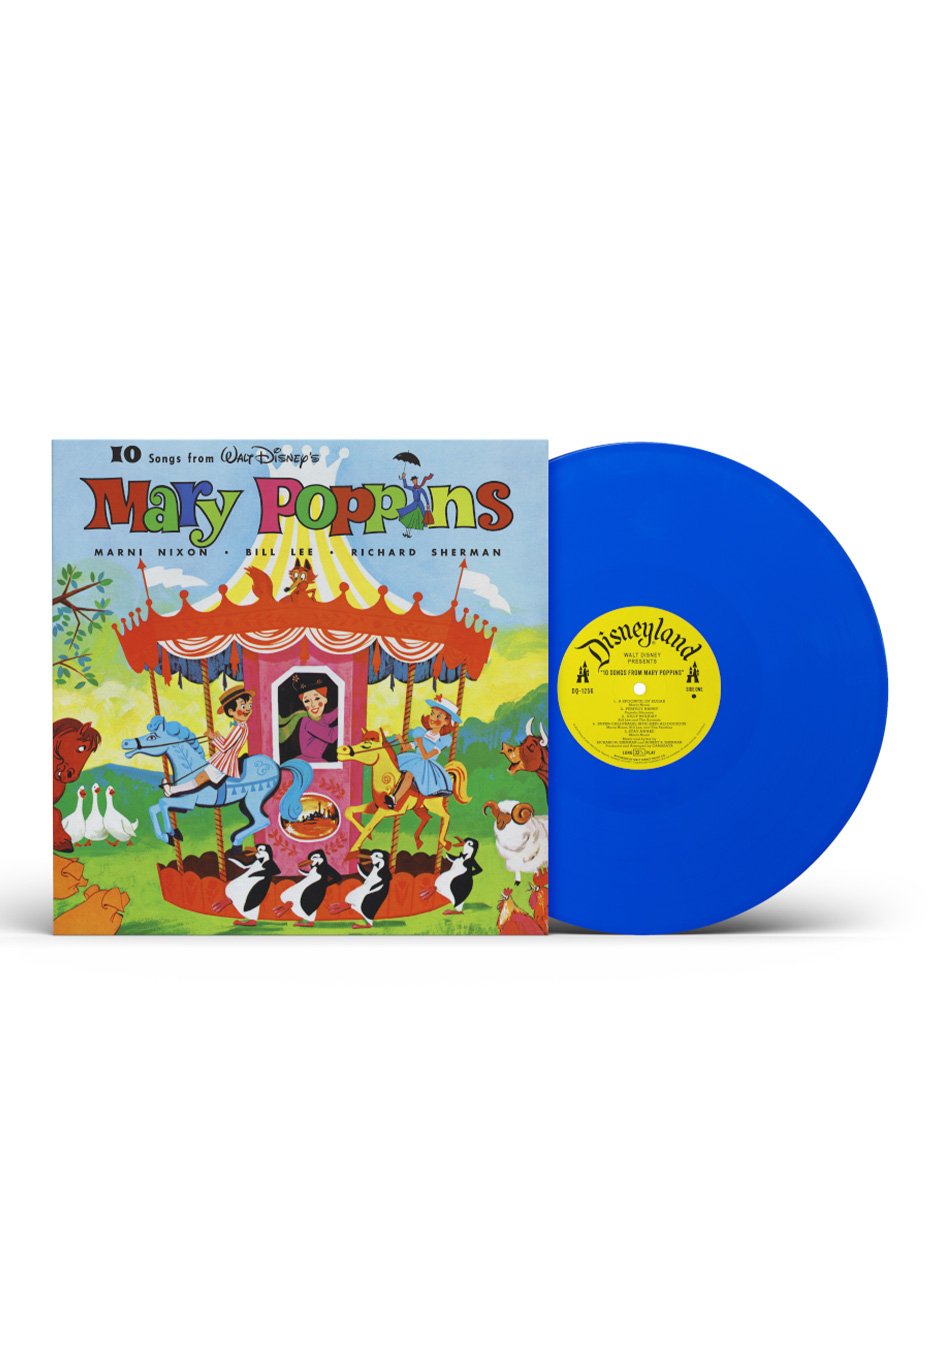 Mary Poppins - 10 Songs From Mary Poppins (60th Anniversary) Ltd. Blue - Colored Vinyl | Neutral-Image